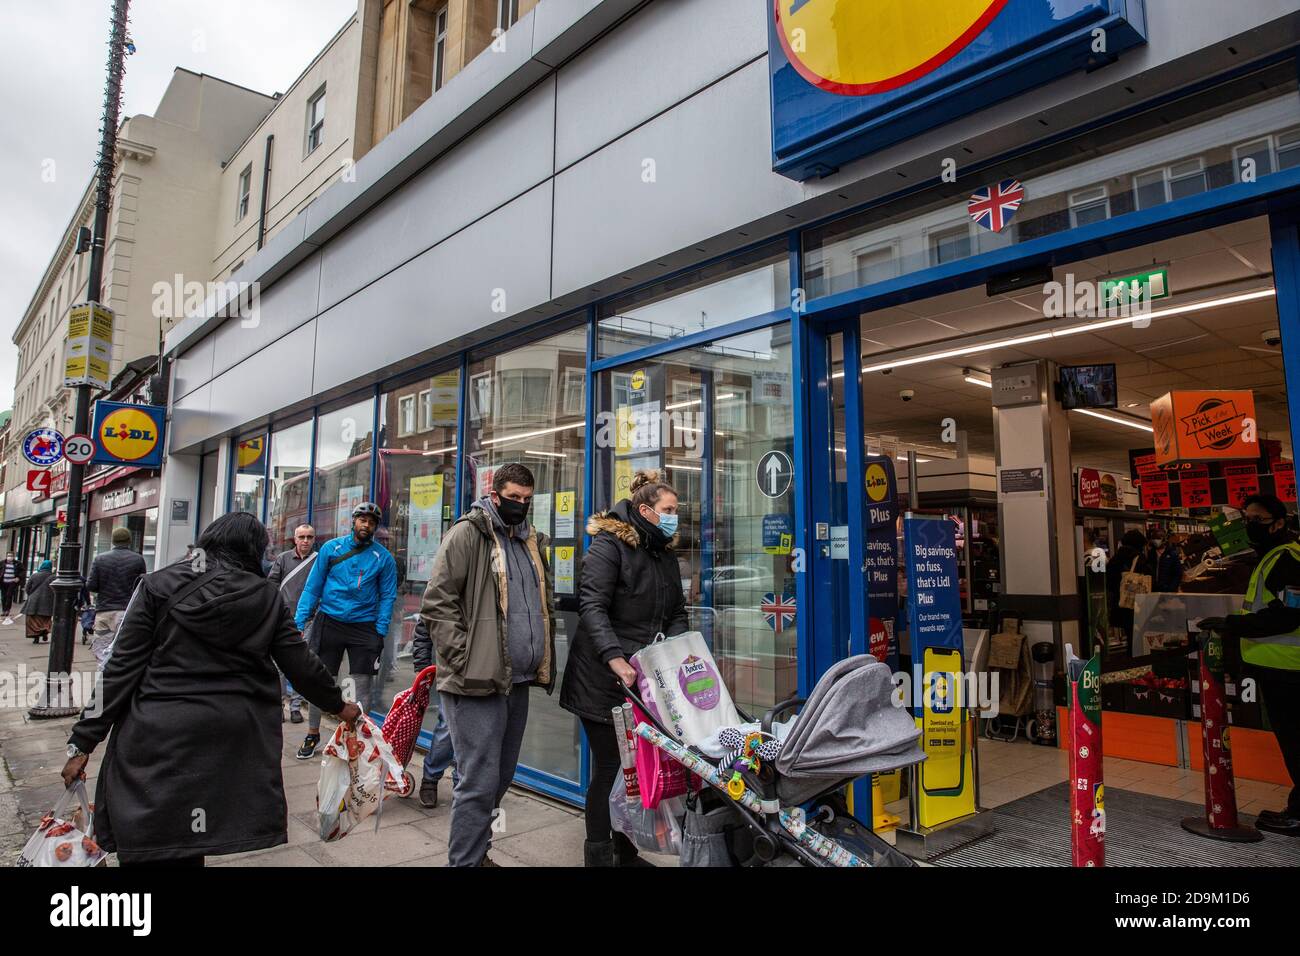 Lidl Supermarket London England Uk High Resolution Stock Photography And Images Alamy